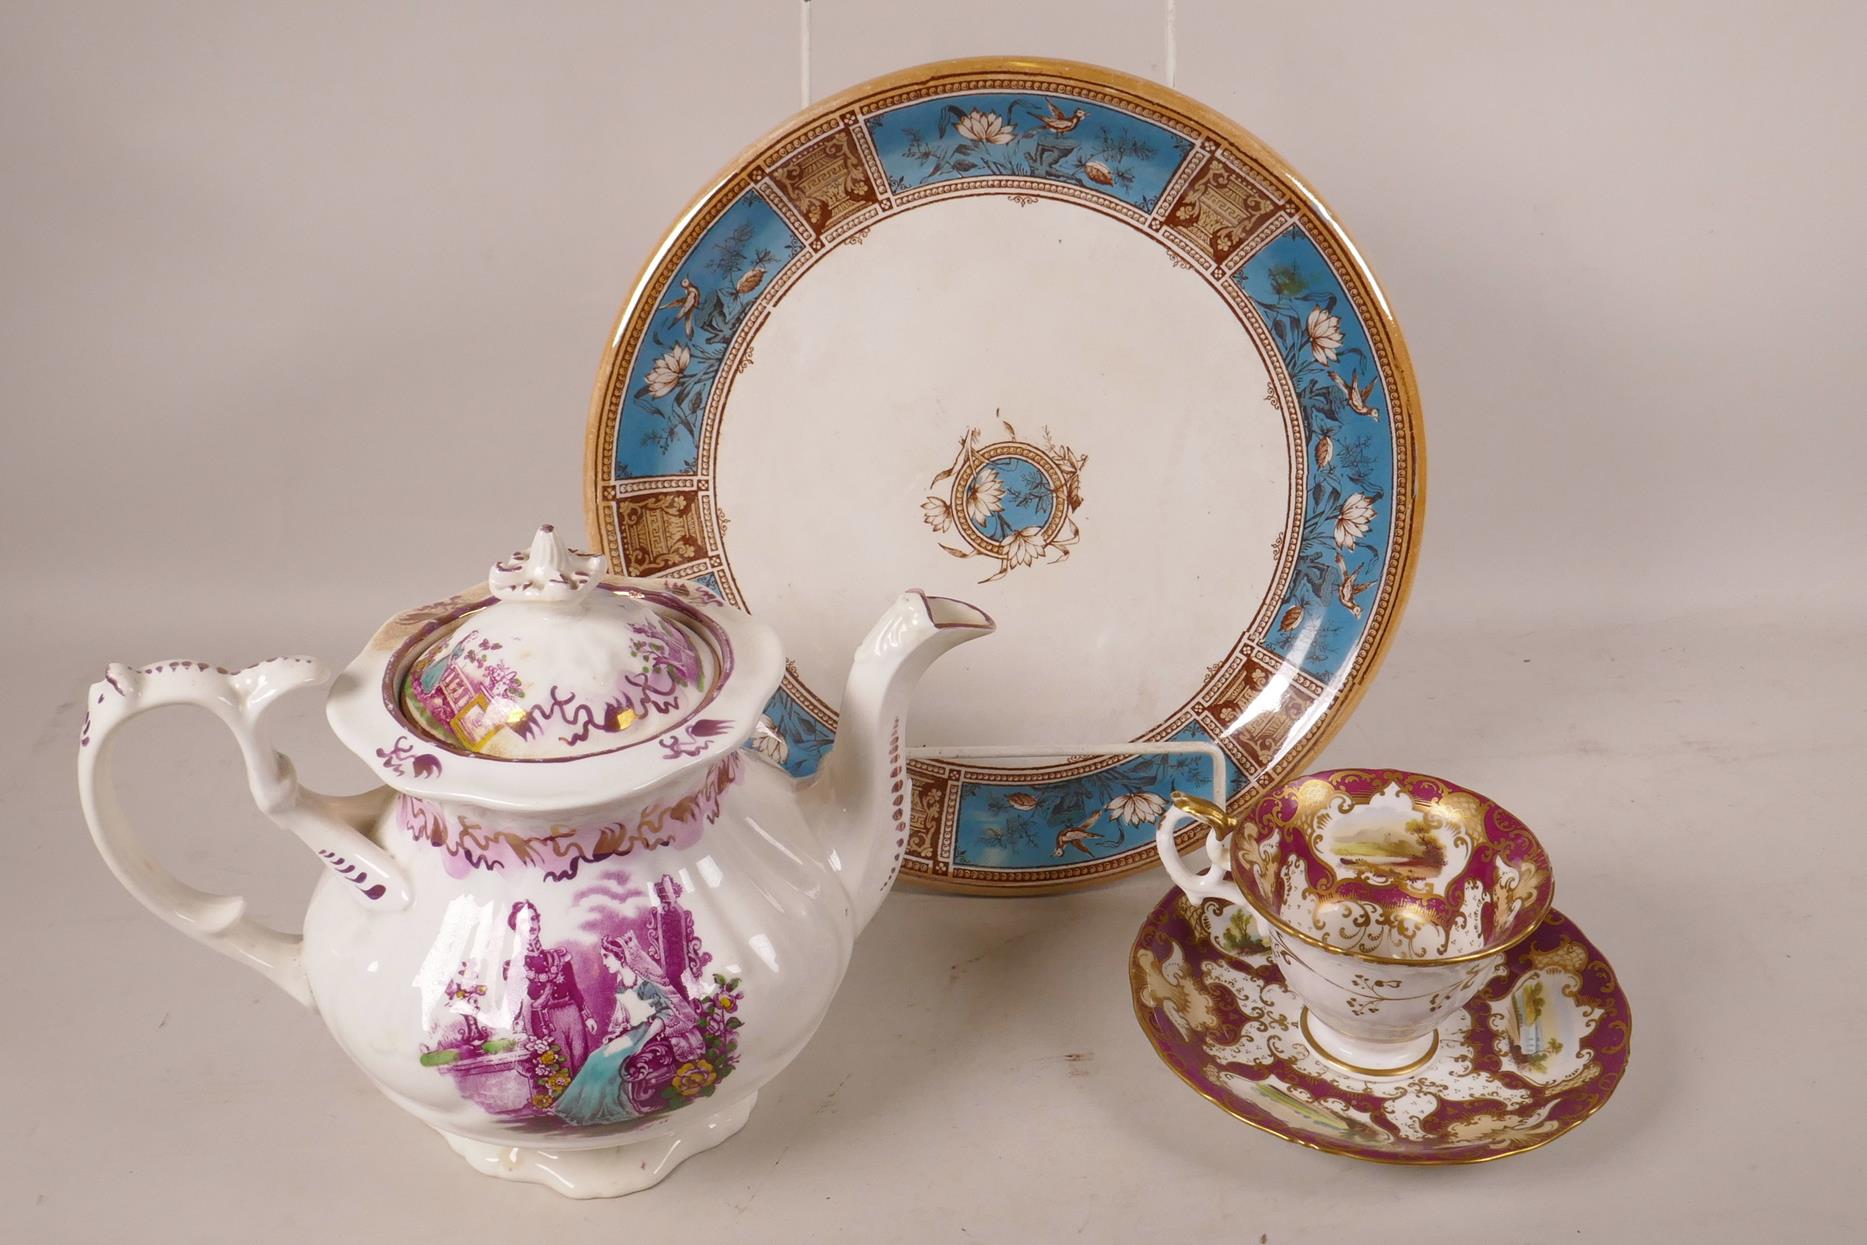 A C19th Edge Malkin porcelain cheese stand, the border printed with classical urns, birds and - Image 2 of 6